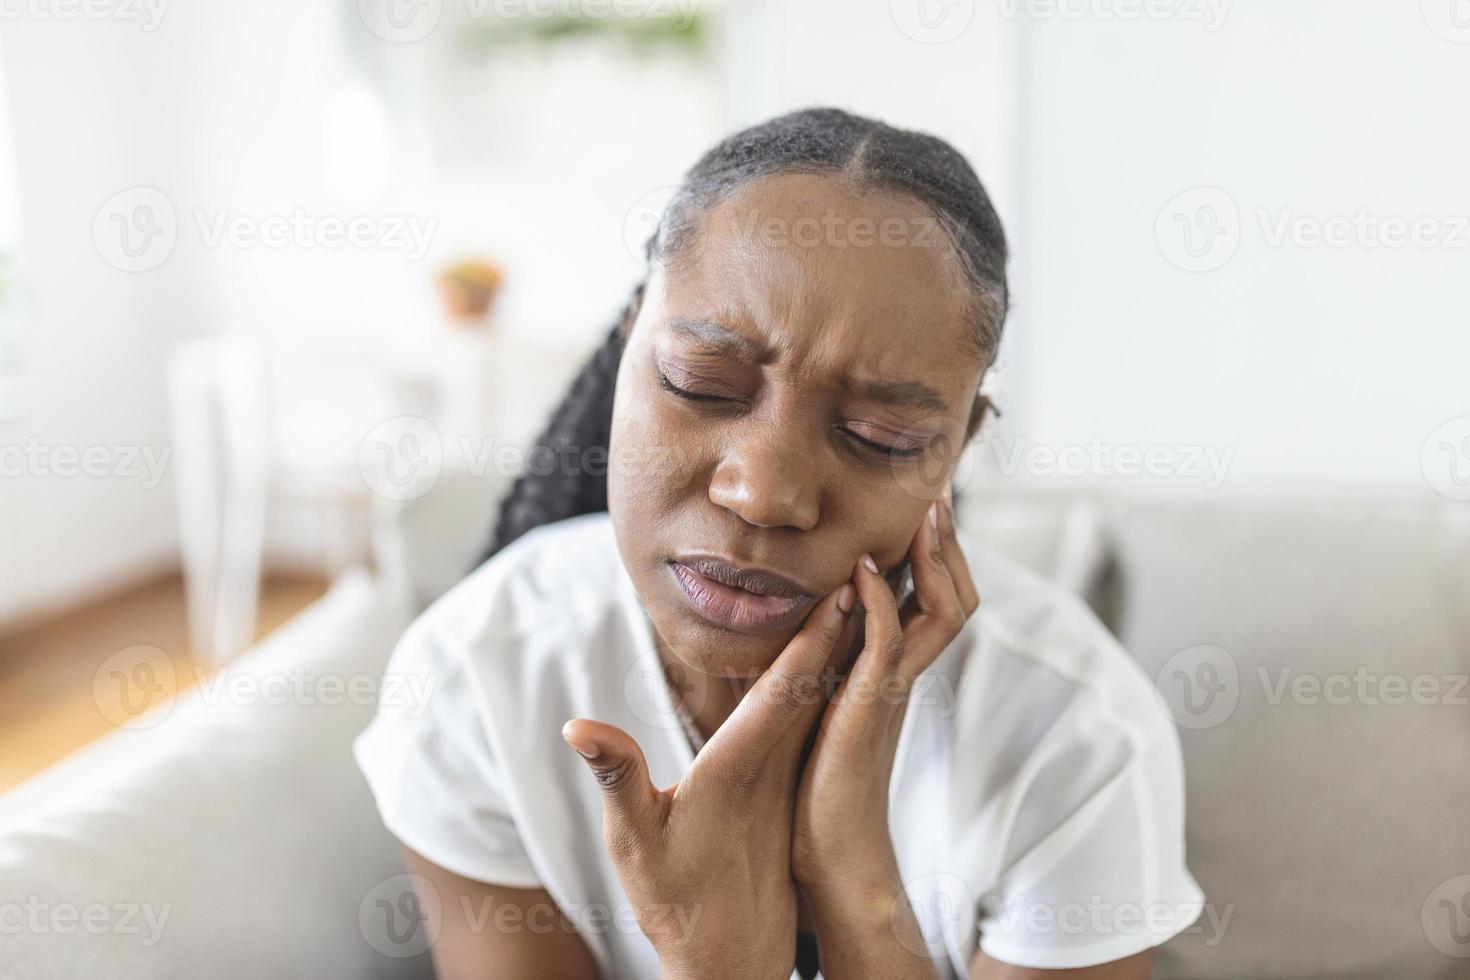 Portrait of unhappy African-American woman suffering from toothache at home. Healthcare, dental health and problem concept. Stock photo